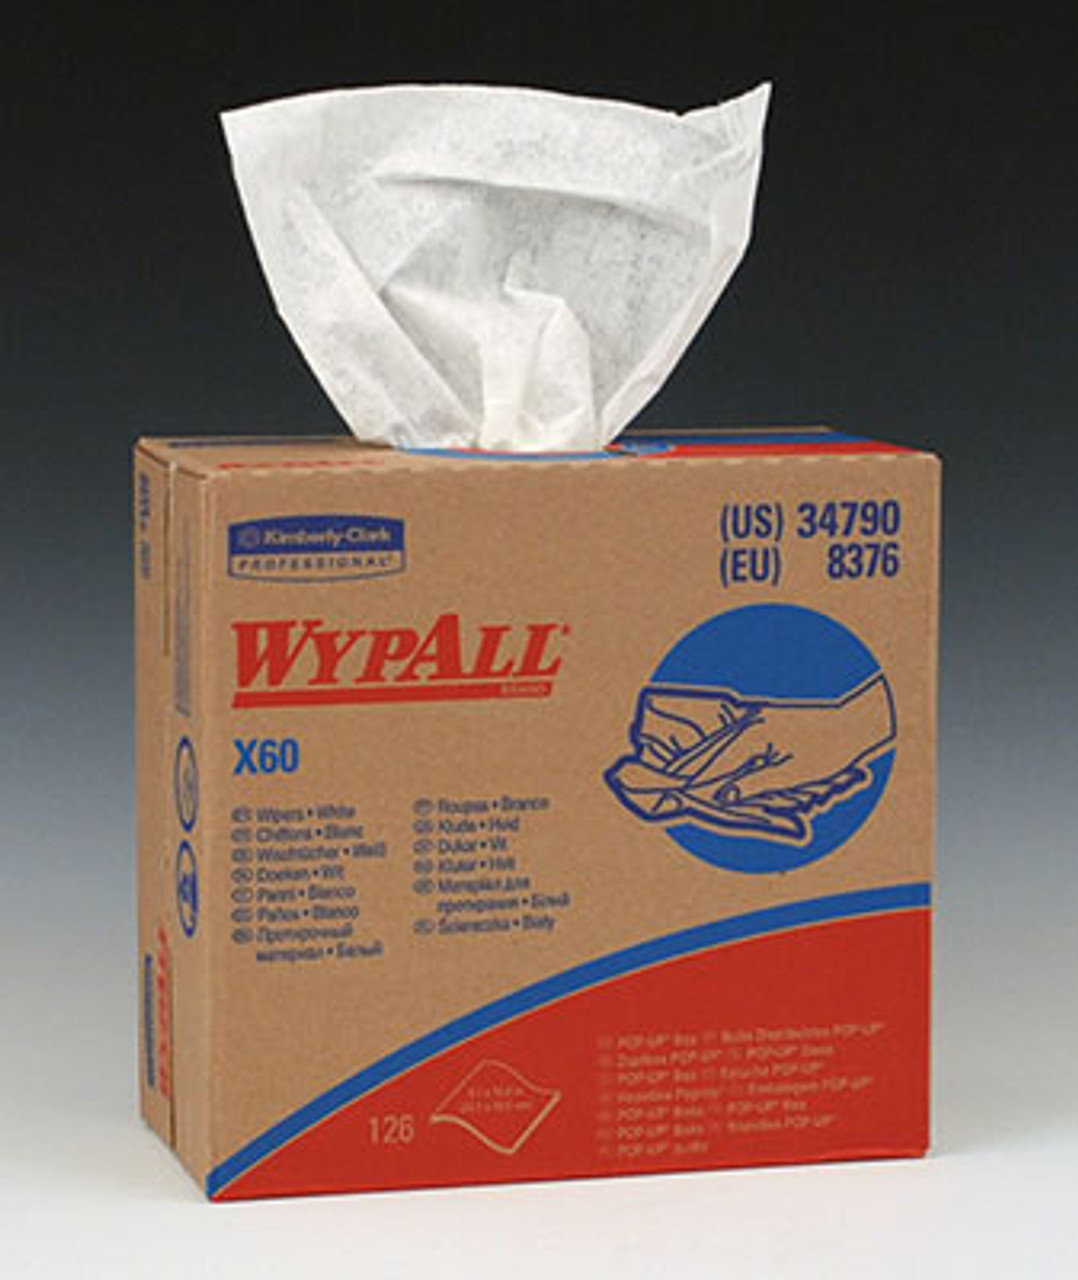 Kimberly-Clark WypAll X60 General-Purpose Wipers - (sold by the box/roll)